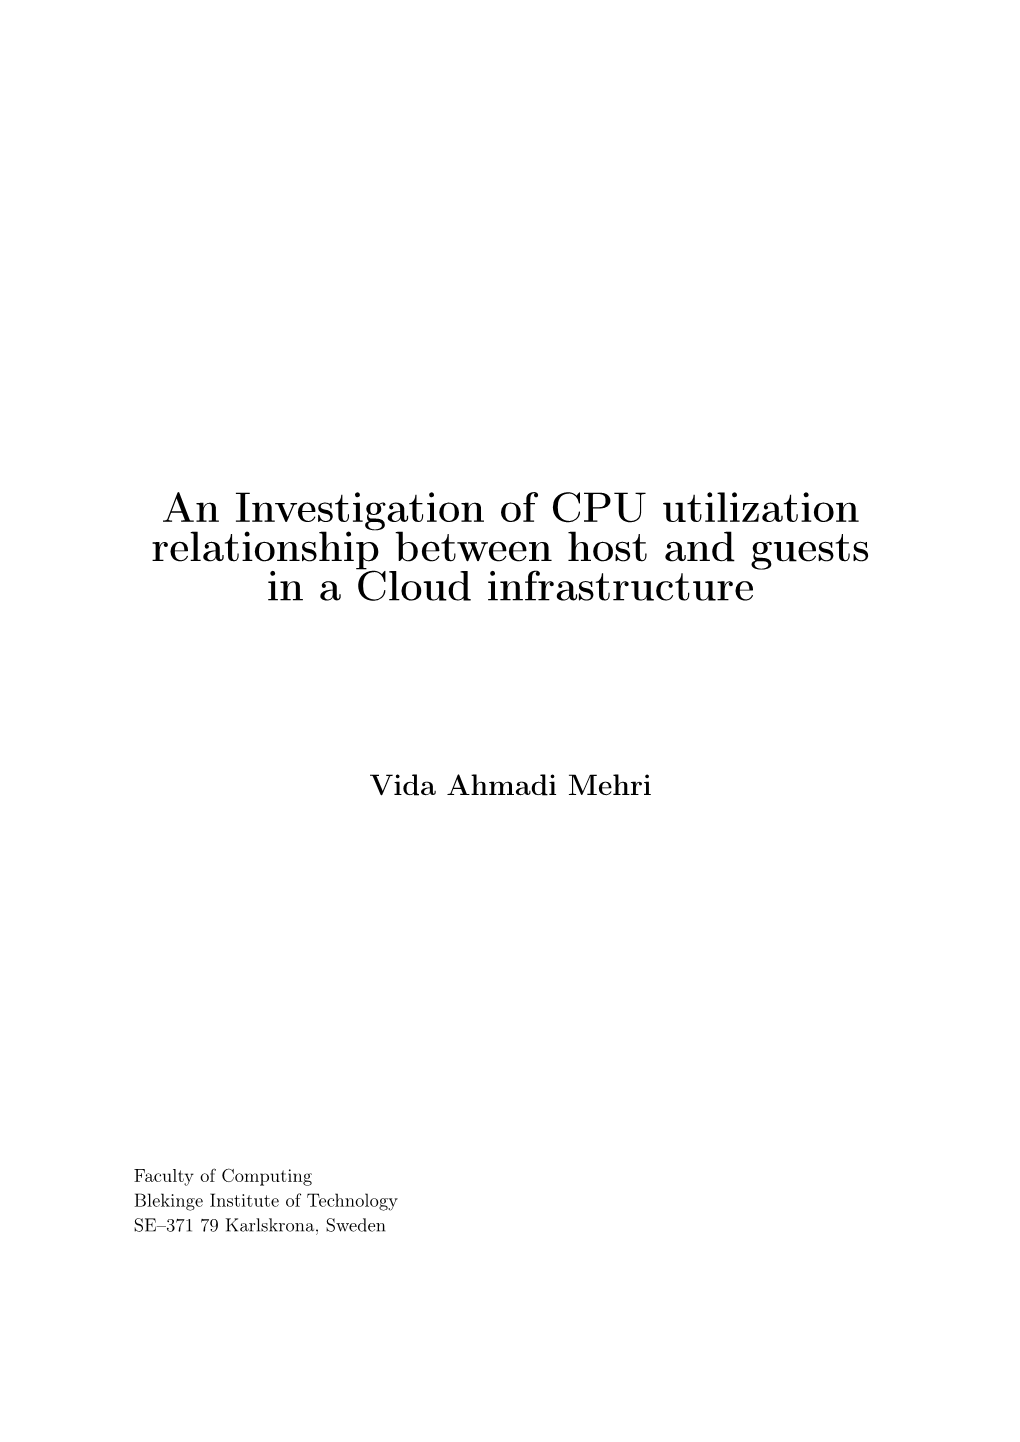 An Investigation of CPU Utilization Relationship Between Host and Guests in a Cloud Infrastructure